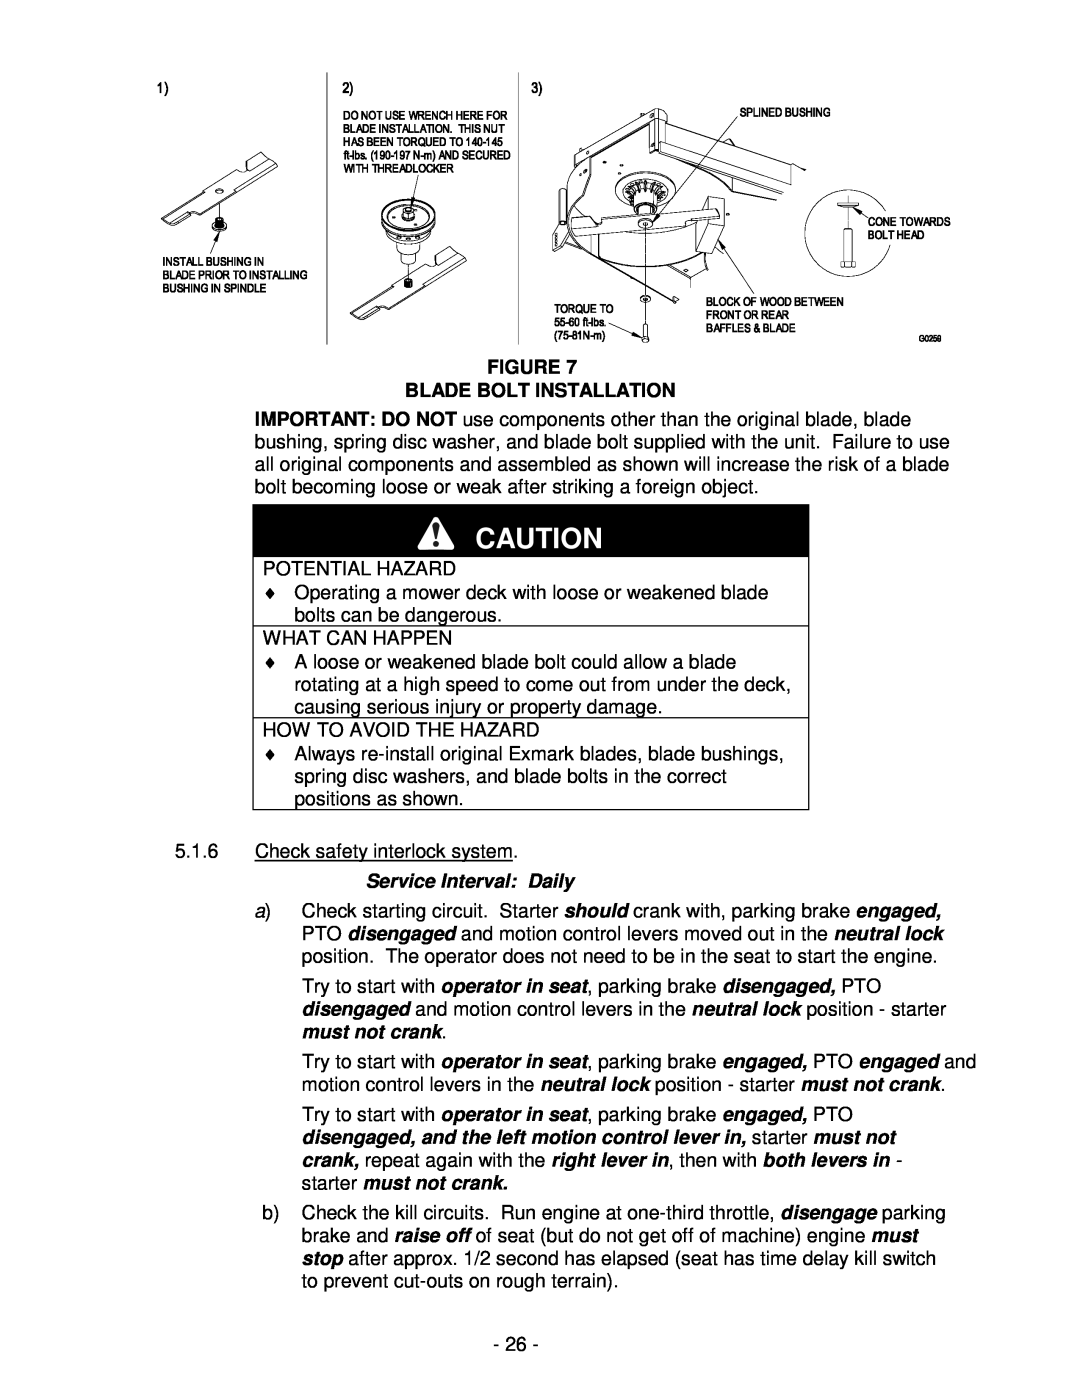 Exmark Lawn Tractor manual Blade Bolt Installation, Service Interval Daily 